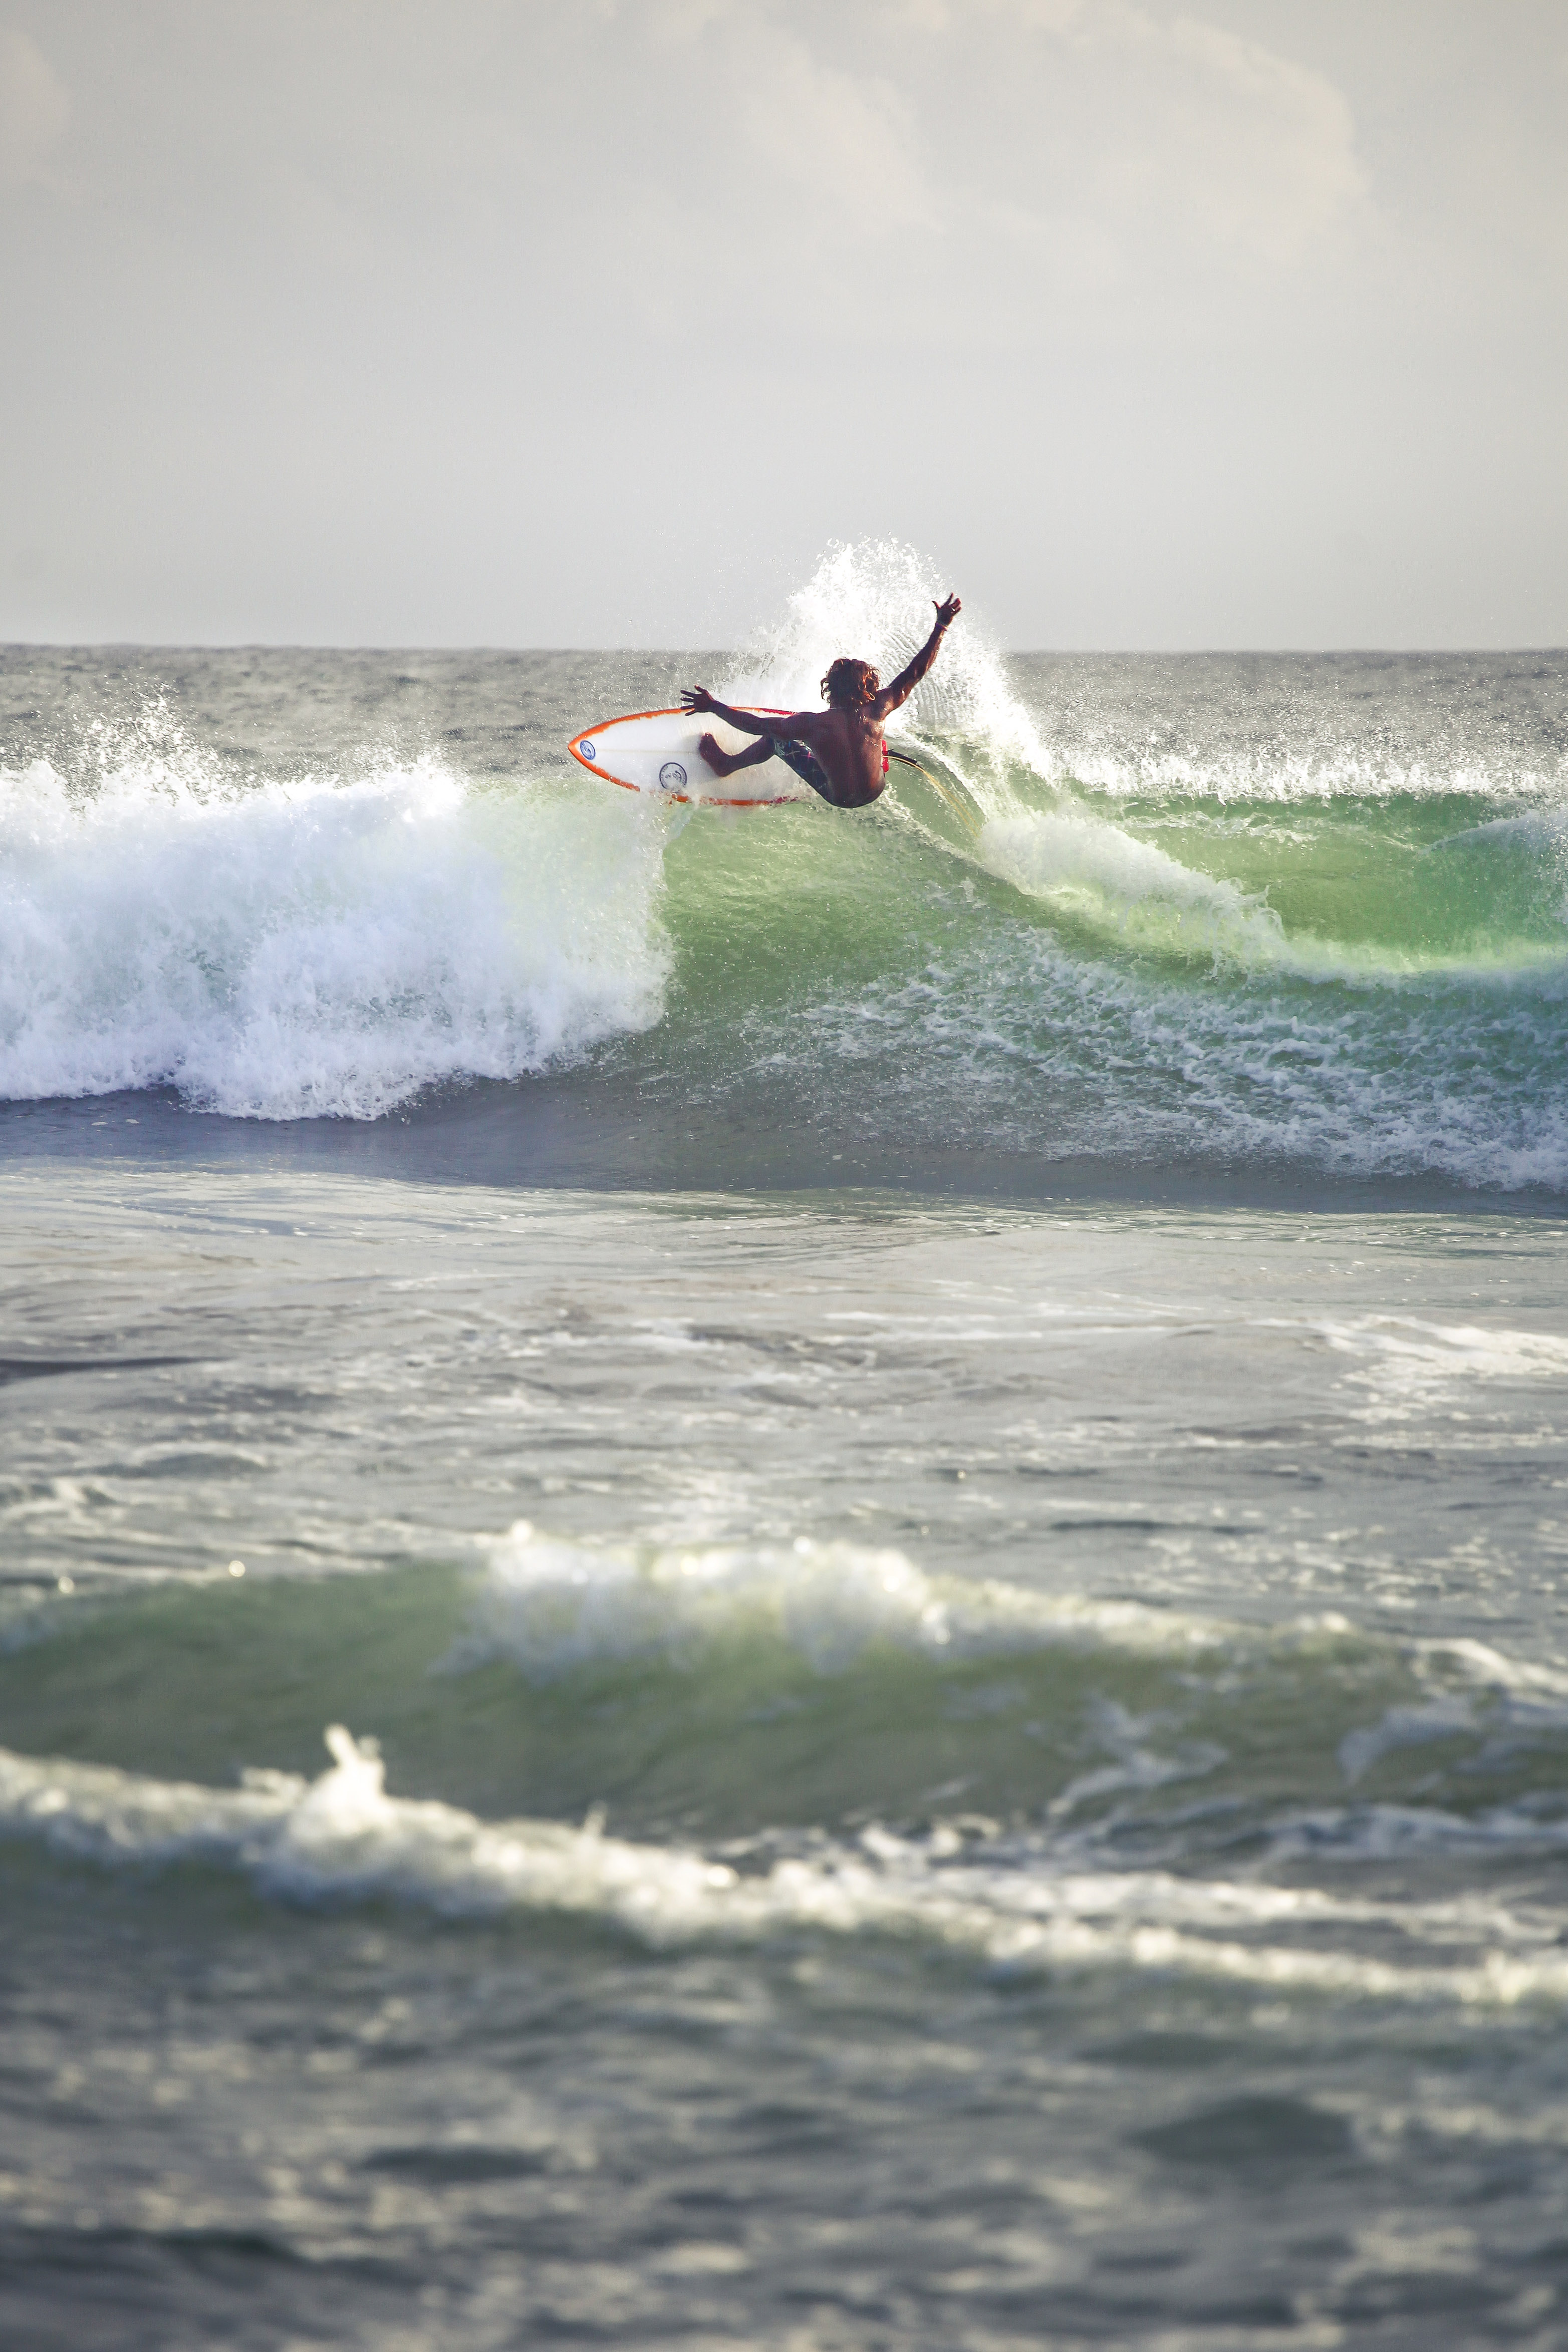 Local surfer ripping some waves, Part 1. Photo: Charlie Malmqvist.